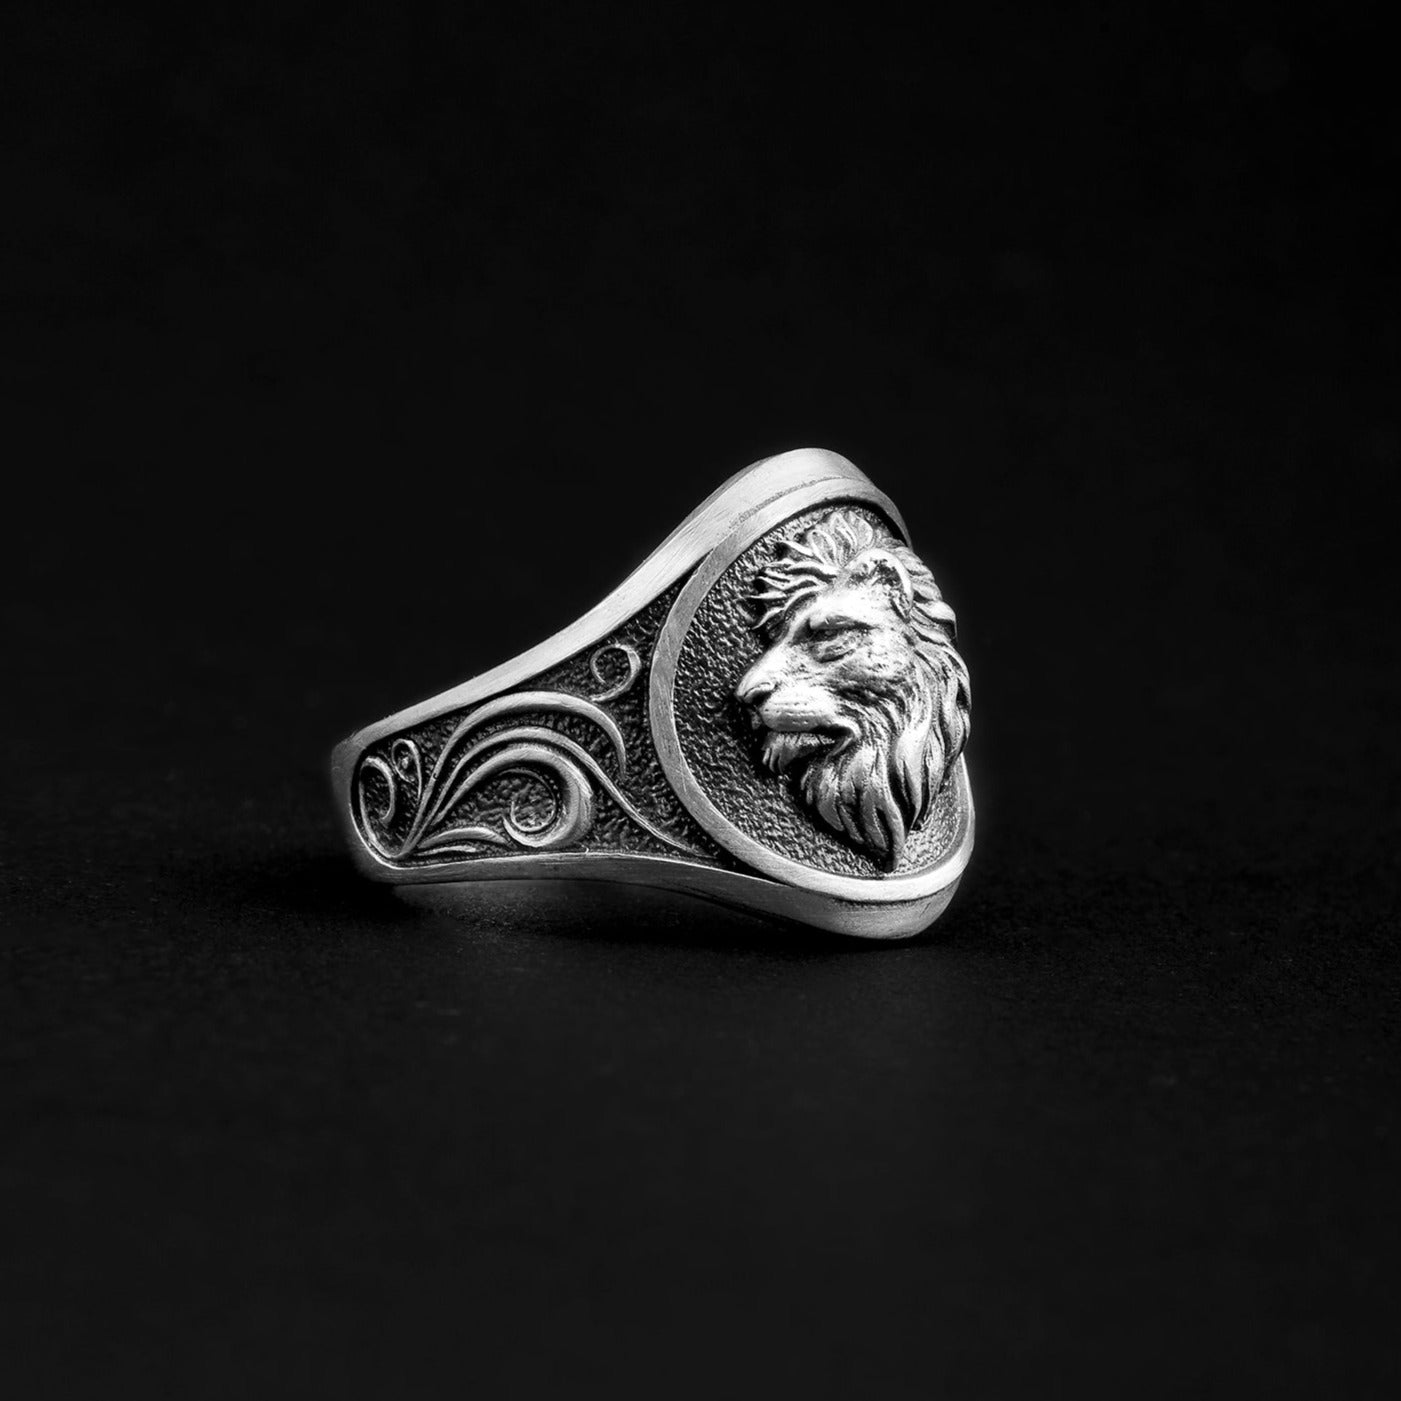 92.5% sterling silver handmade king lion head face high quality unique ring  band for gifting, stylish luxury lion ring sr363 | TRIBAL ORNAMENTS